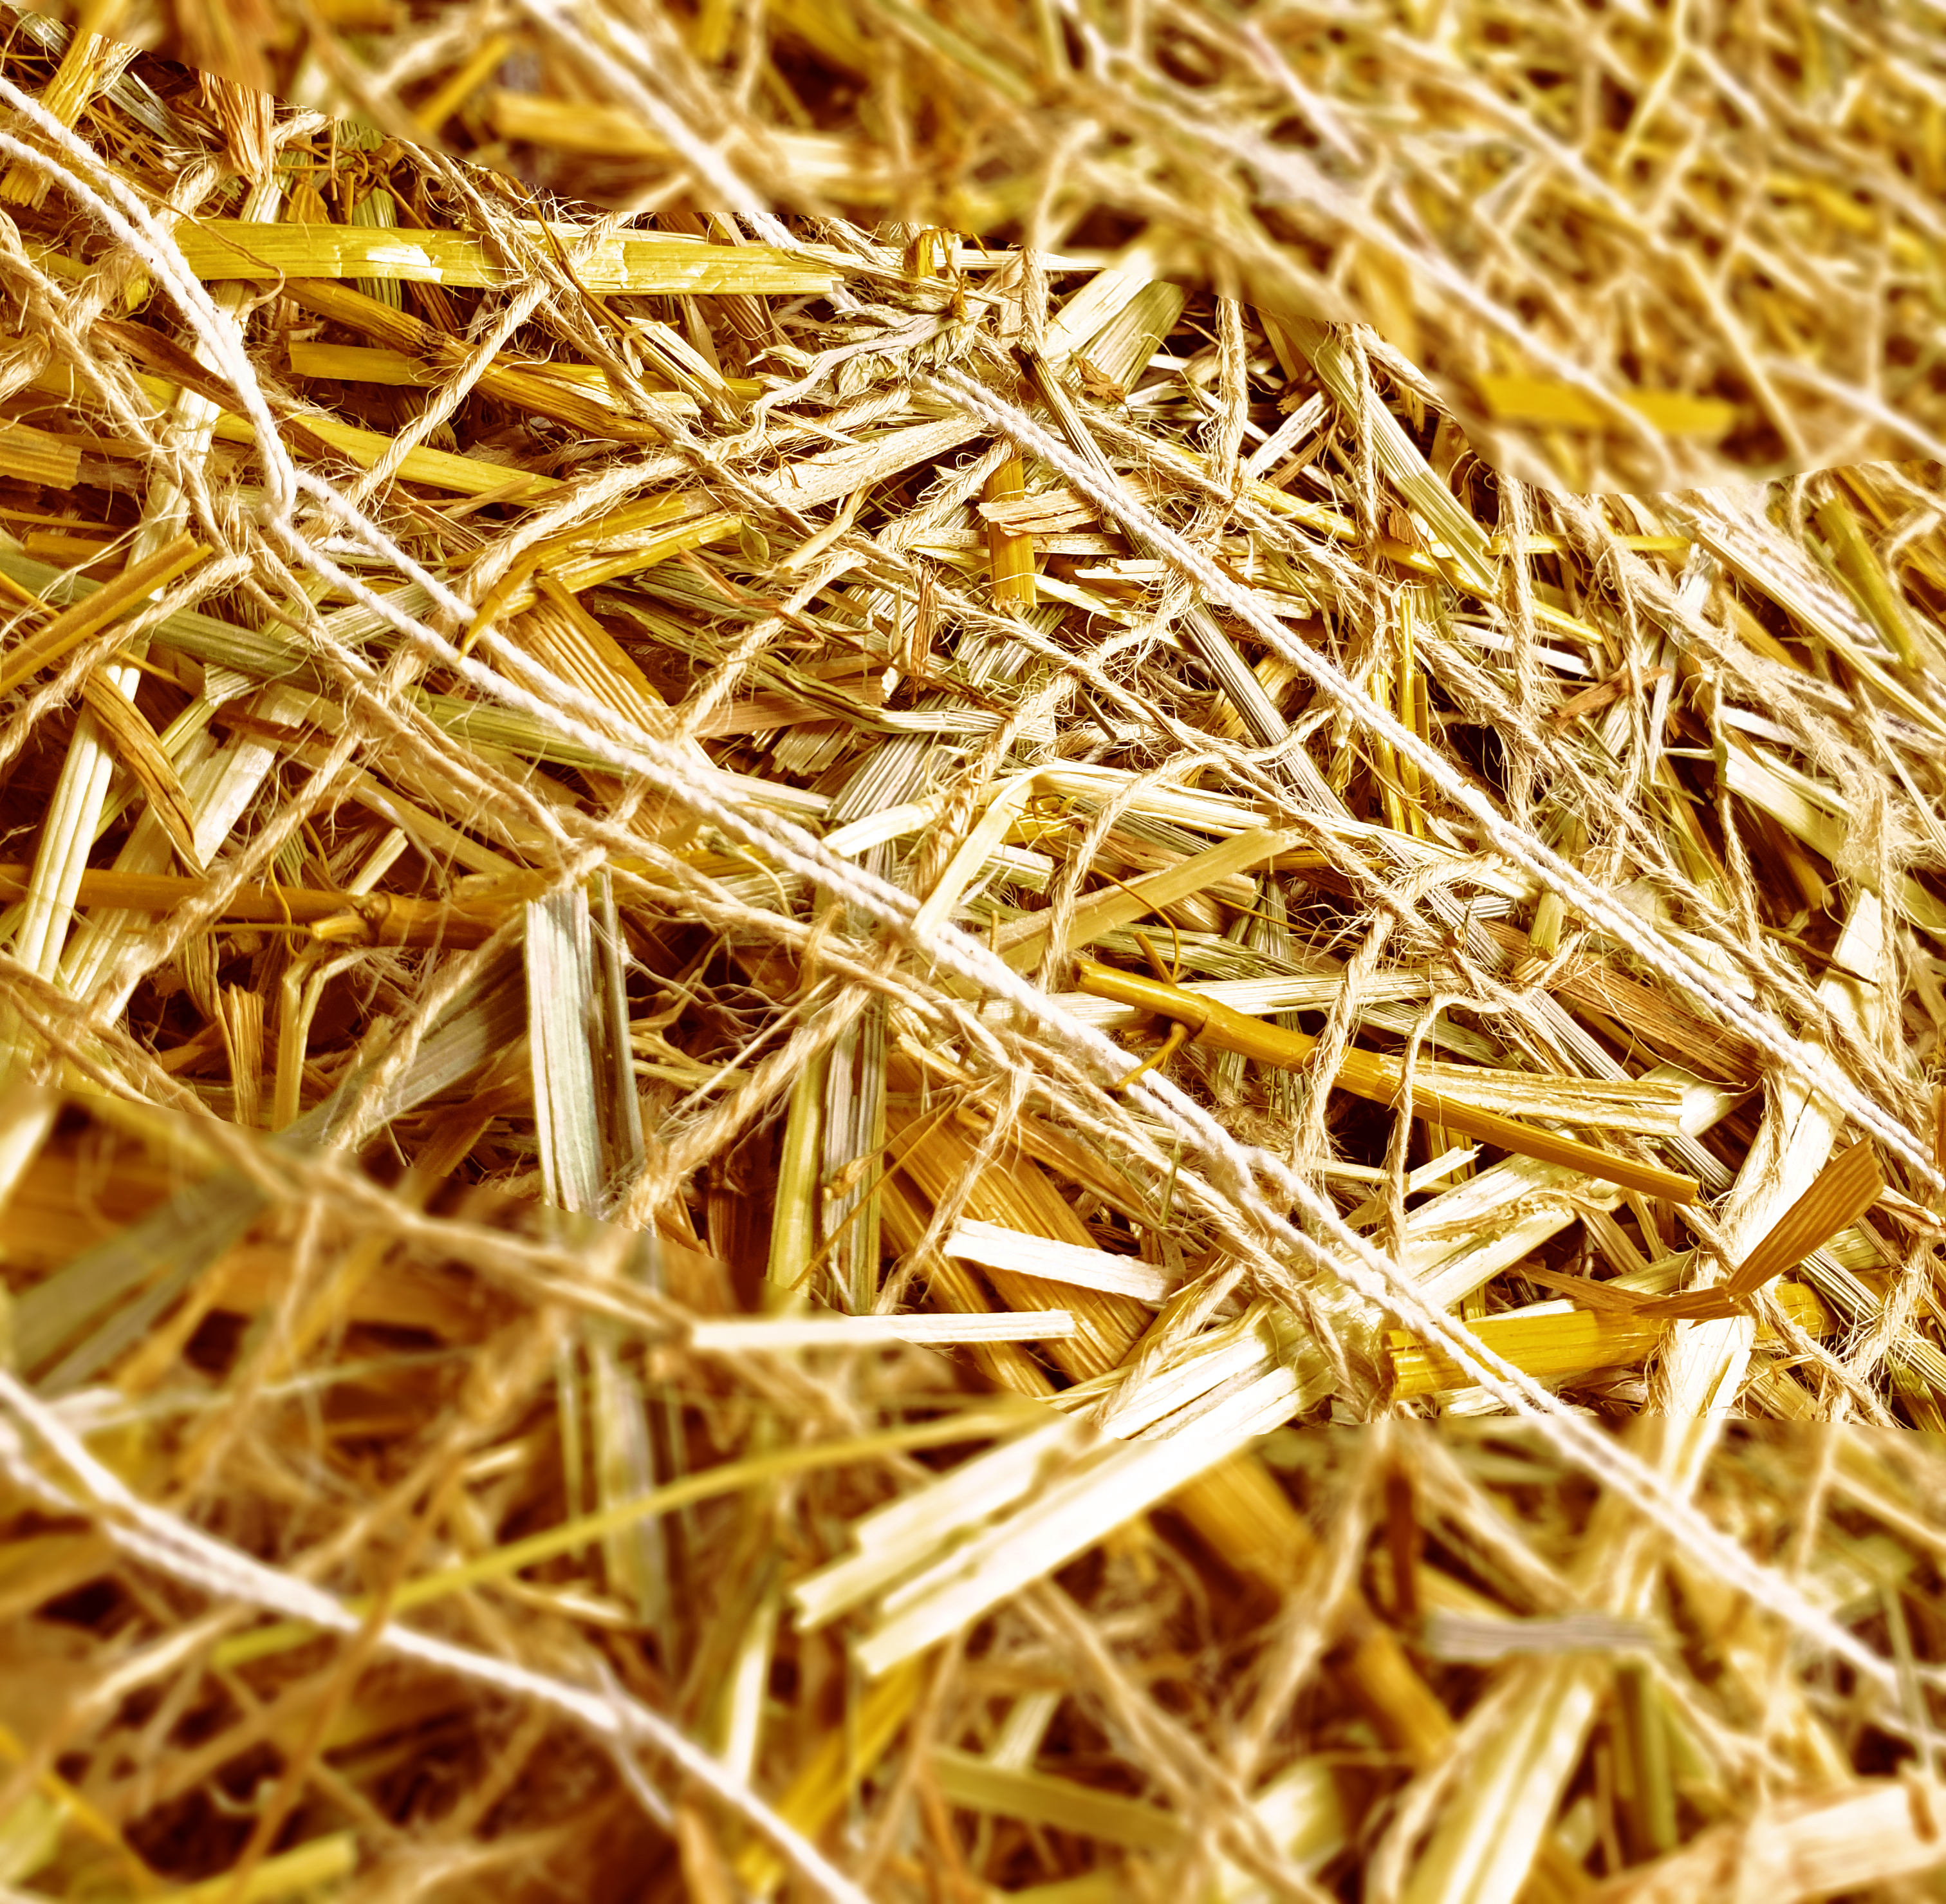 100% agricultural straw and one organic jute net securely sewn together with biodegradable thread